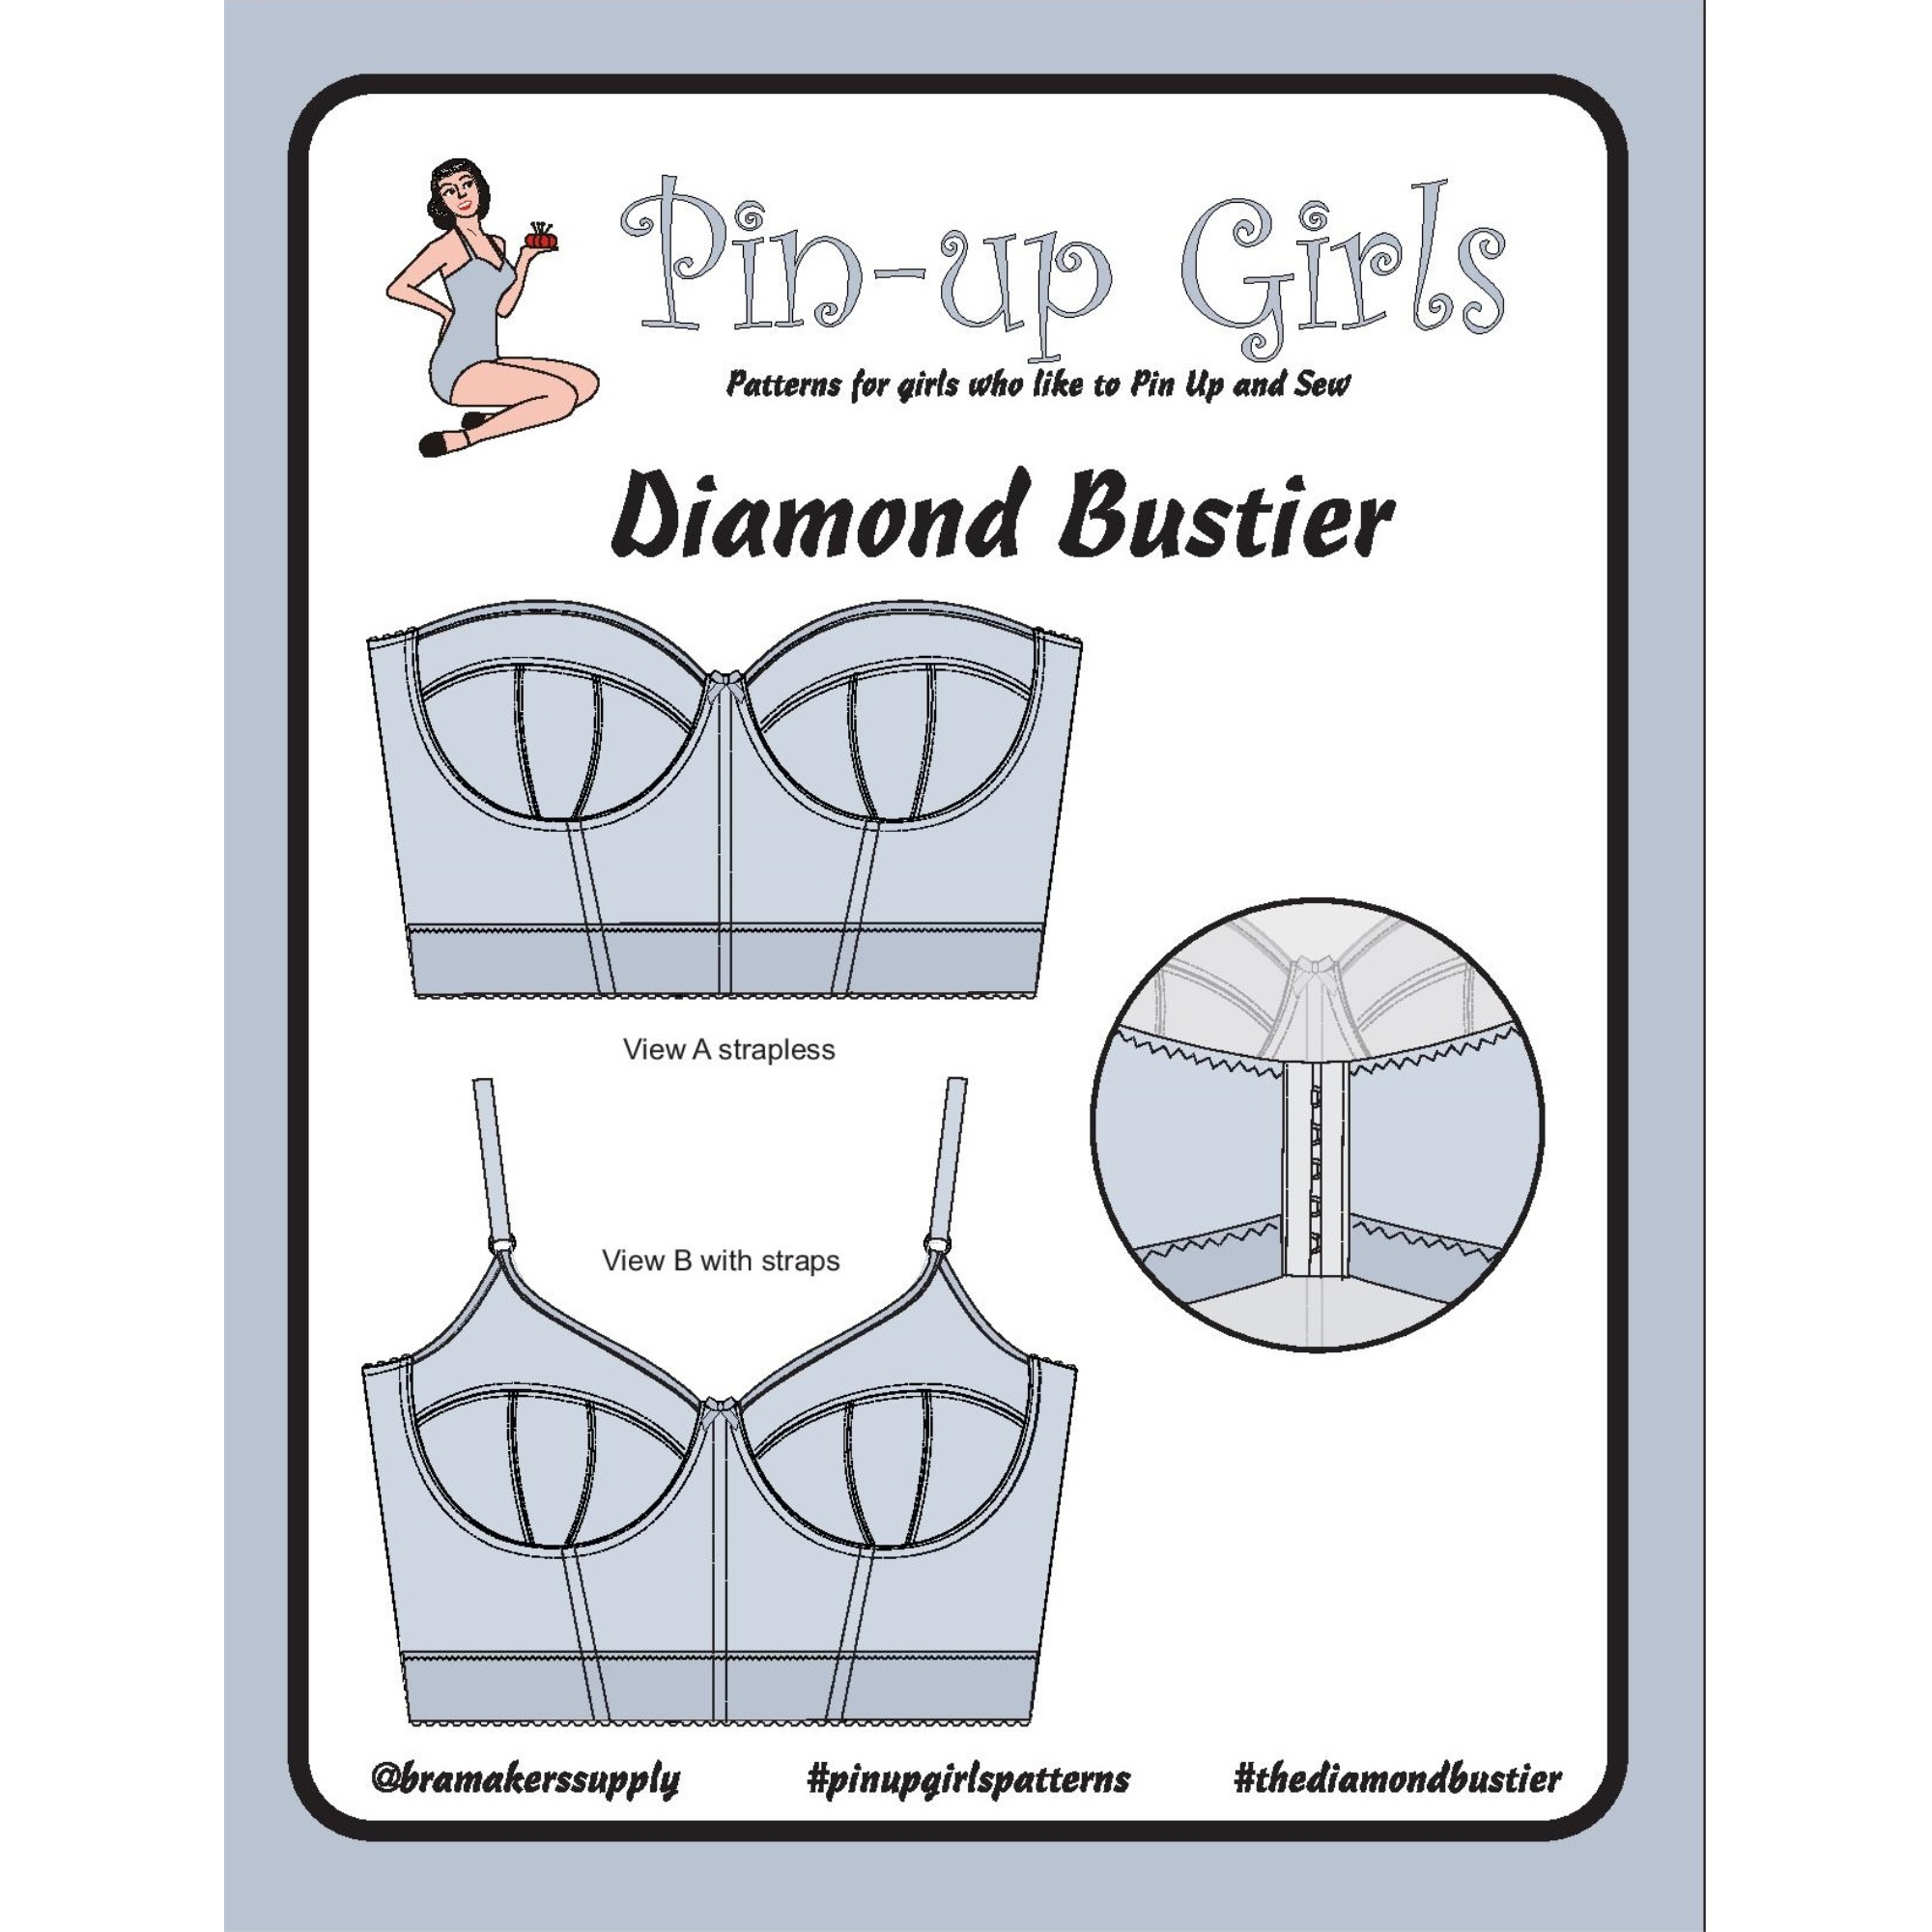 White Bra Cup with a Strap - Size 36B - Bra Cups - Bra Making Supplies -  Notions